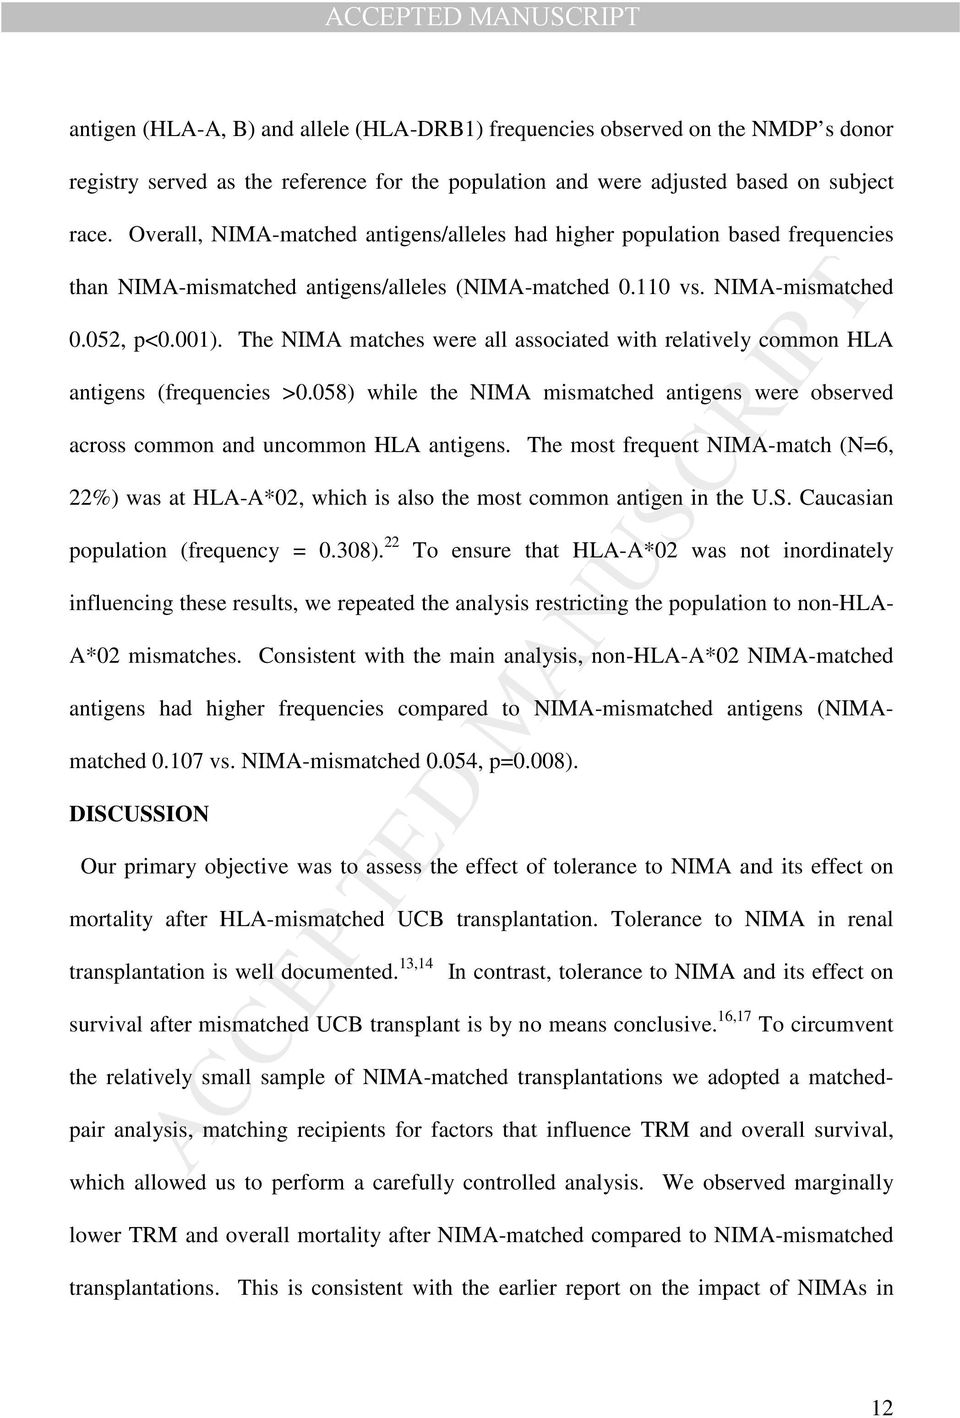 The NIMA matches were all associated with relatively common HLA antigens (frequencies >0.058) while the NIMA mismatched antigens were observed across common and uncommon HLA antigens.